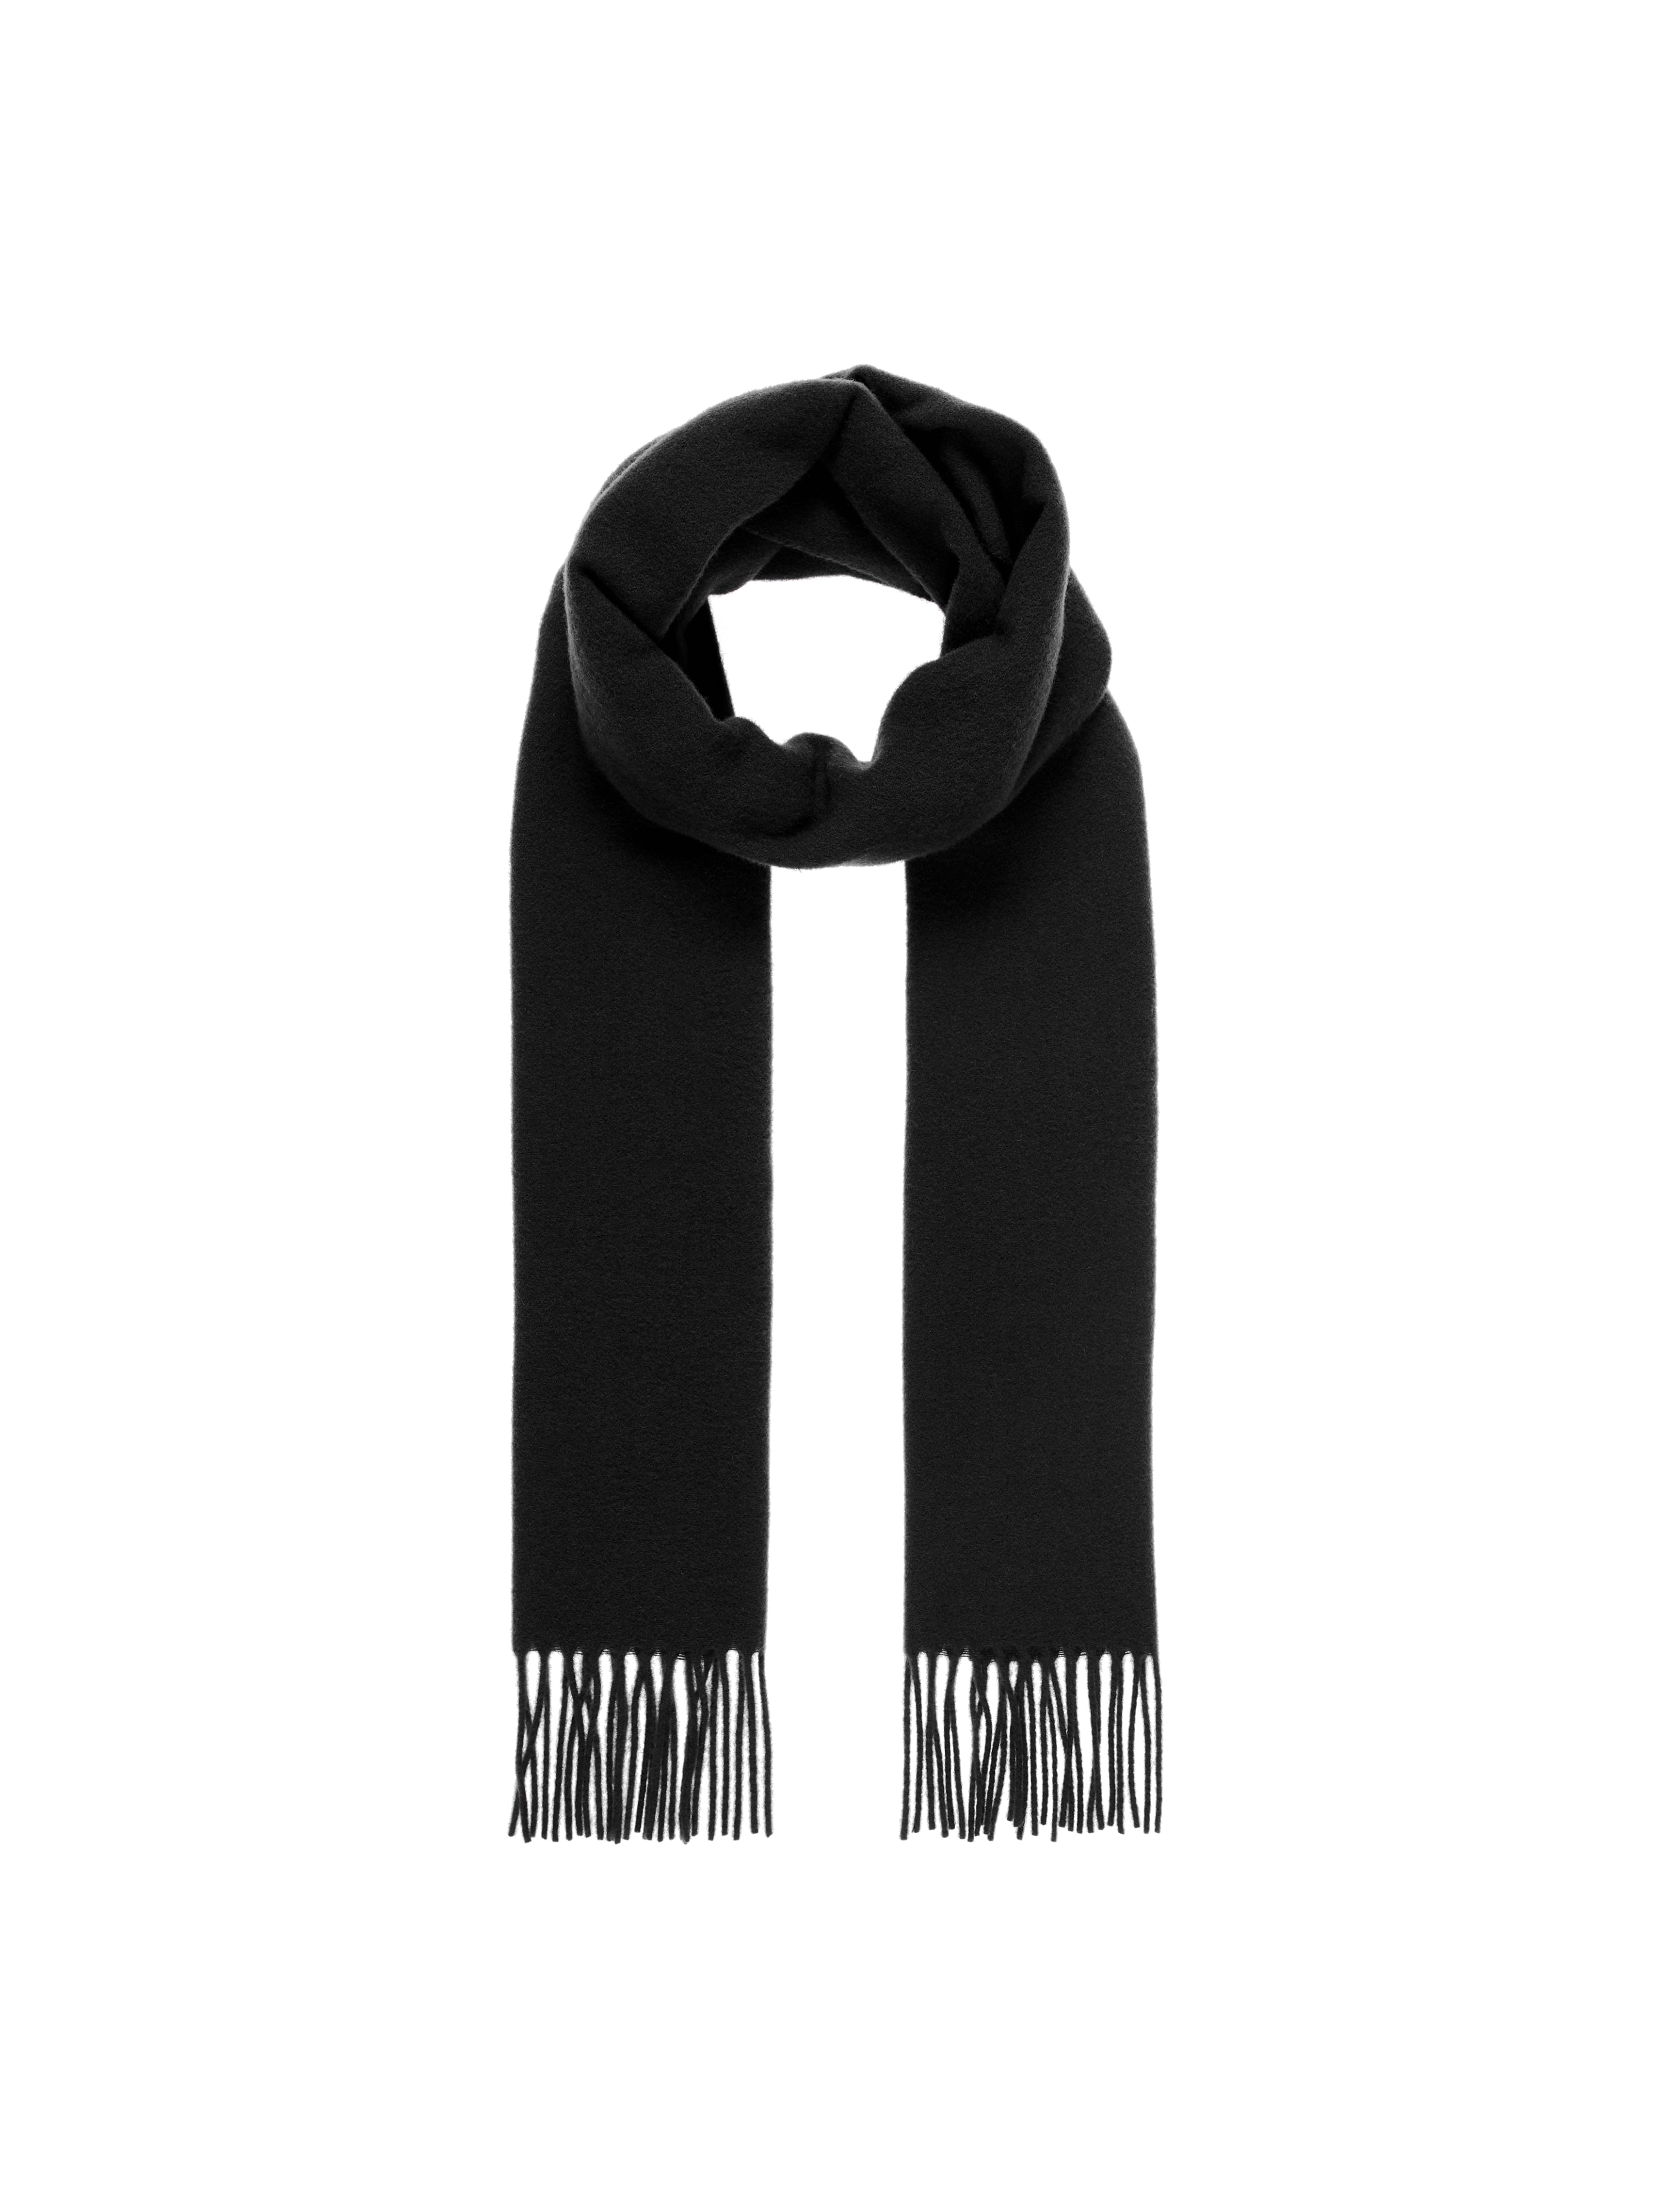 SOLID WOOL SCARF